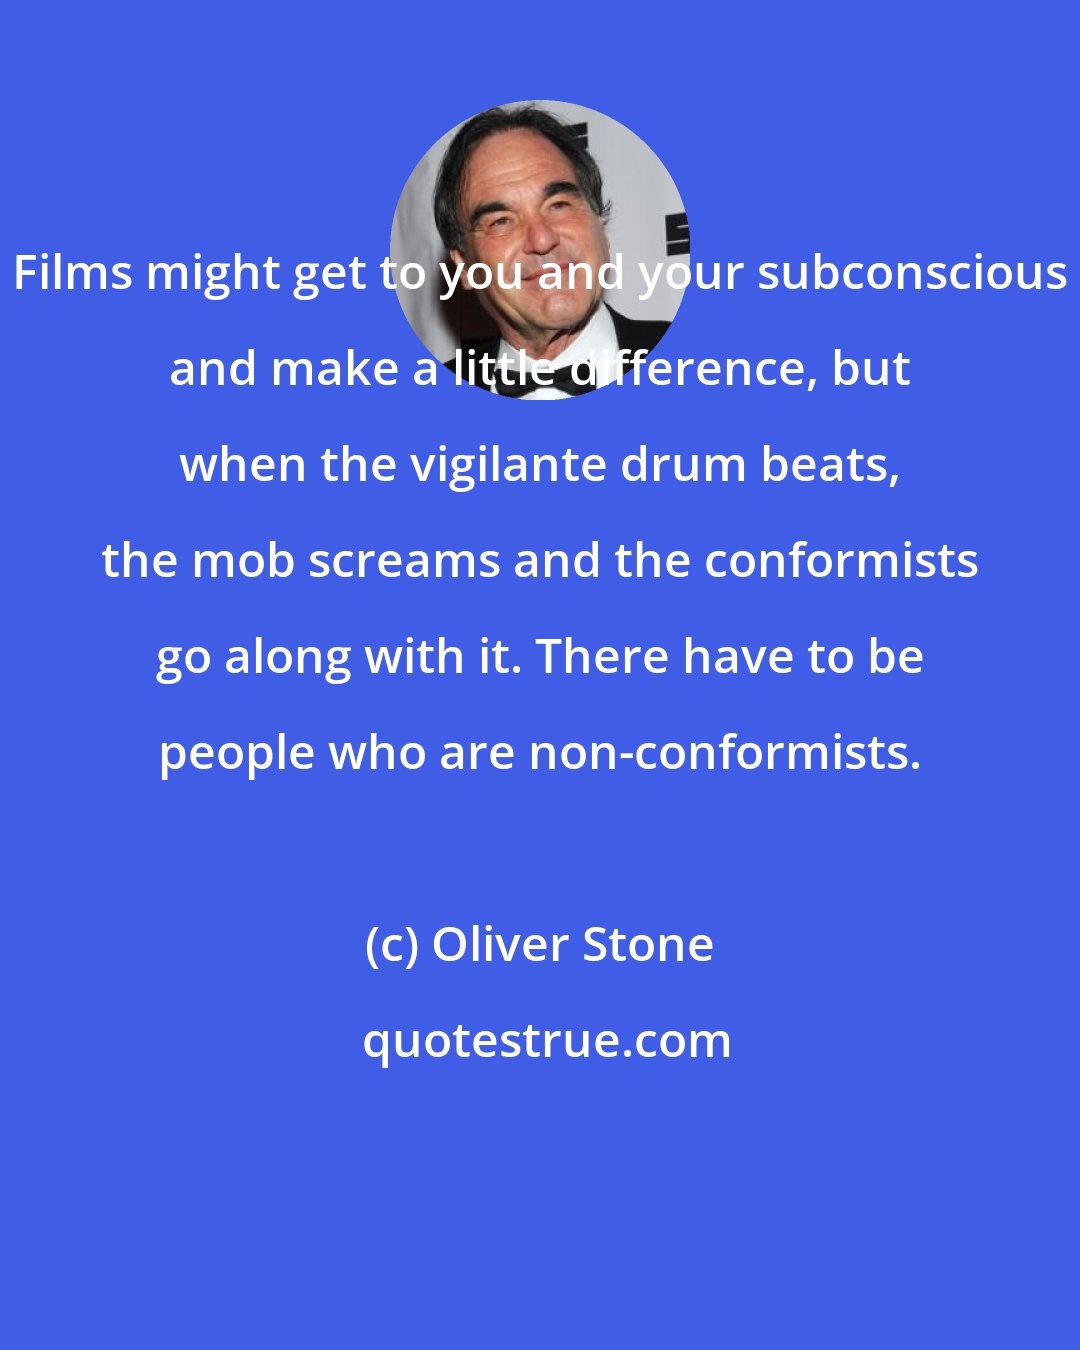 Oliver Stone: Films might get to you and your subconscious and make a little difference, but when the vigilante drum beats, the mob screams and the conformists go along with it. There have to be people who are non-conformists.